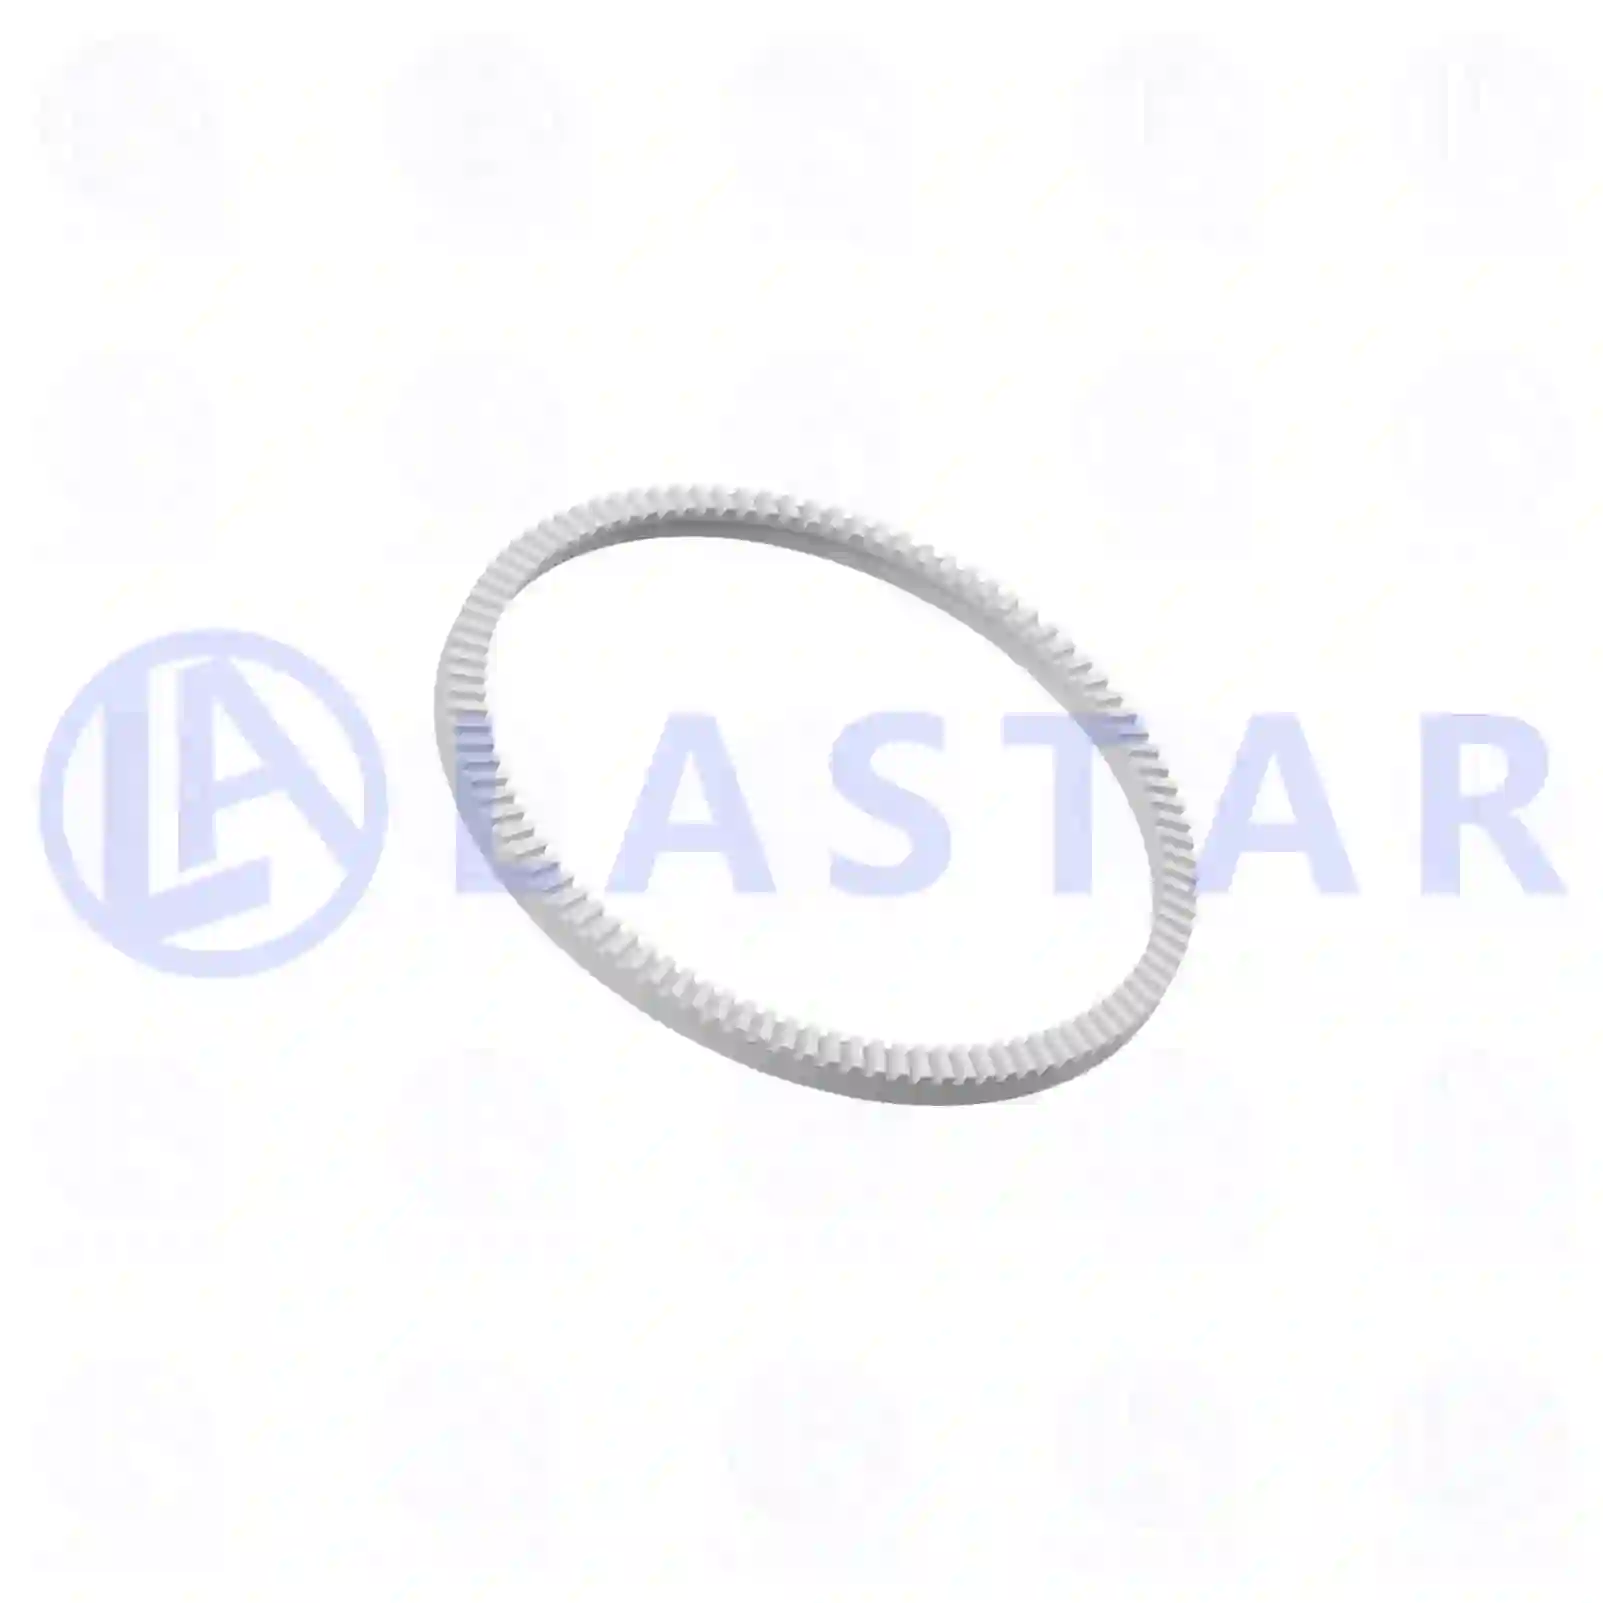  ABS ring || Lastar Spare Part | Truck Spare Parts, Auotomotive Spare Parts